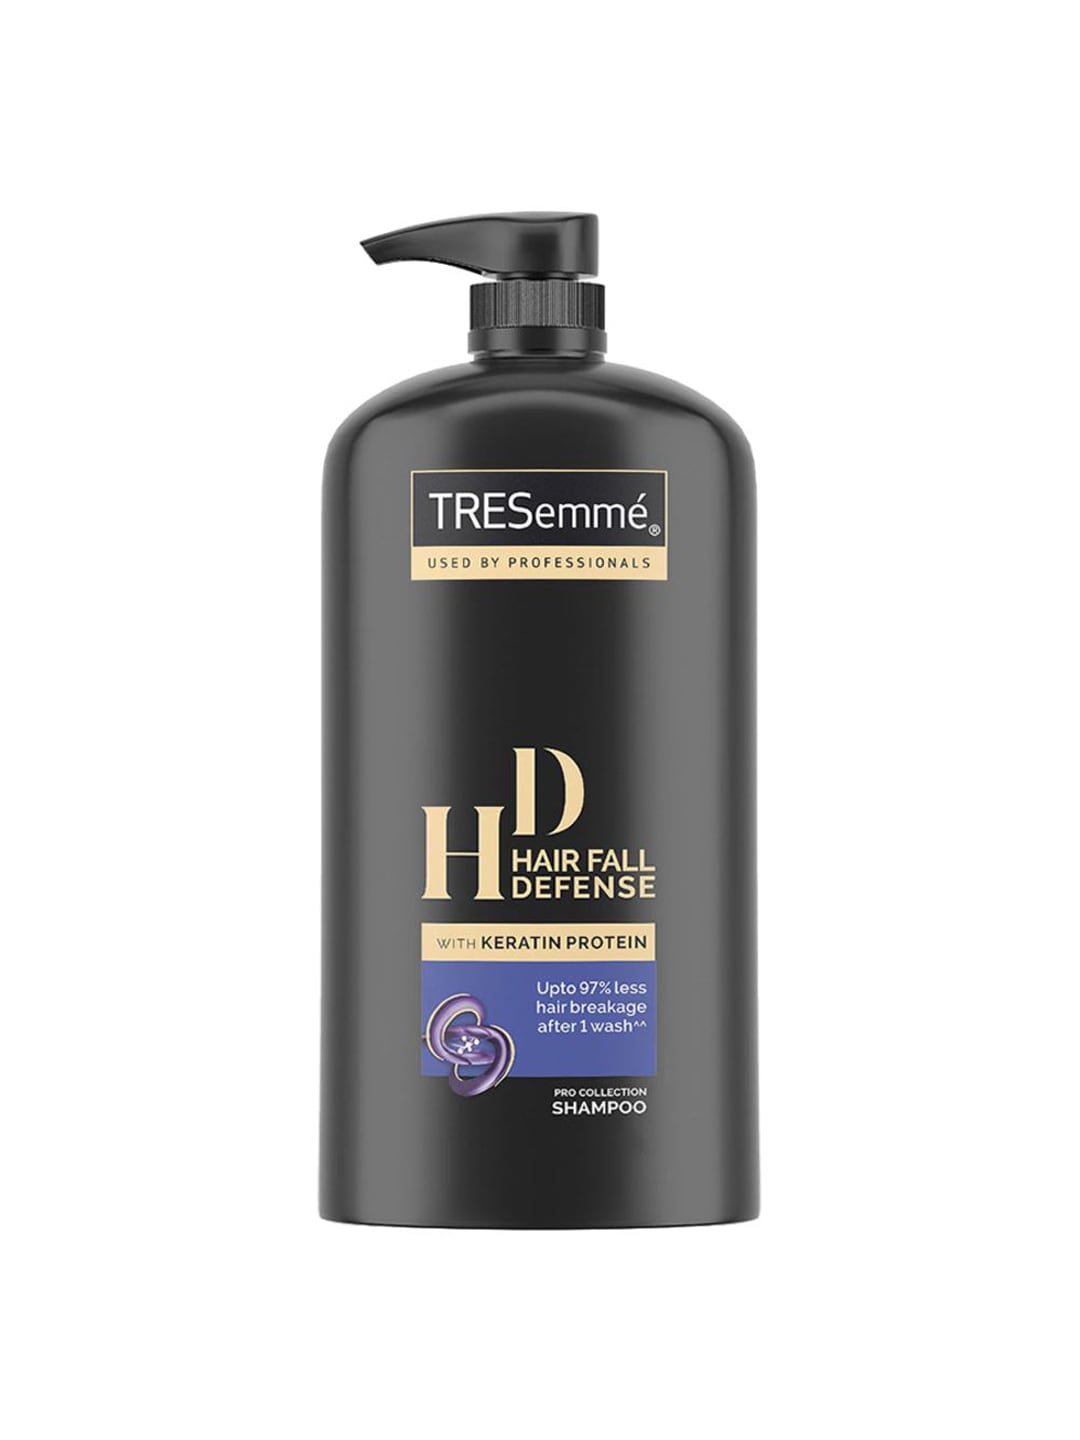 TRESemme Hair Fall Defense Shampoo with Keratin Protein 1000 ml Price in India